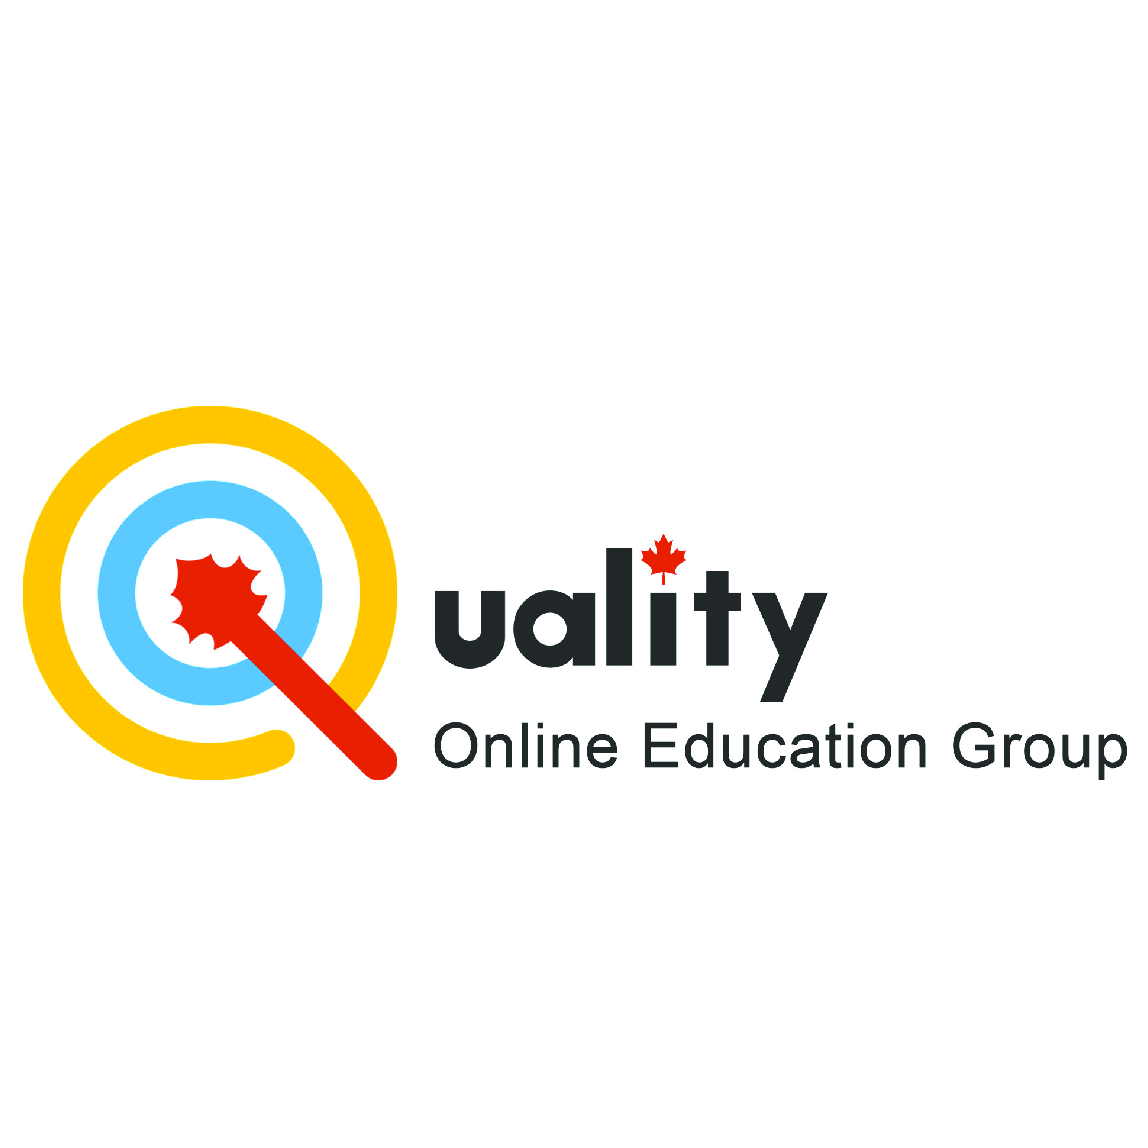 Quality Online Education Group